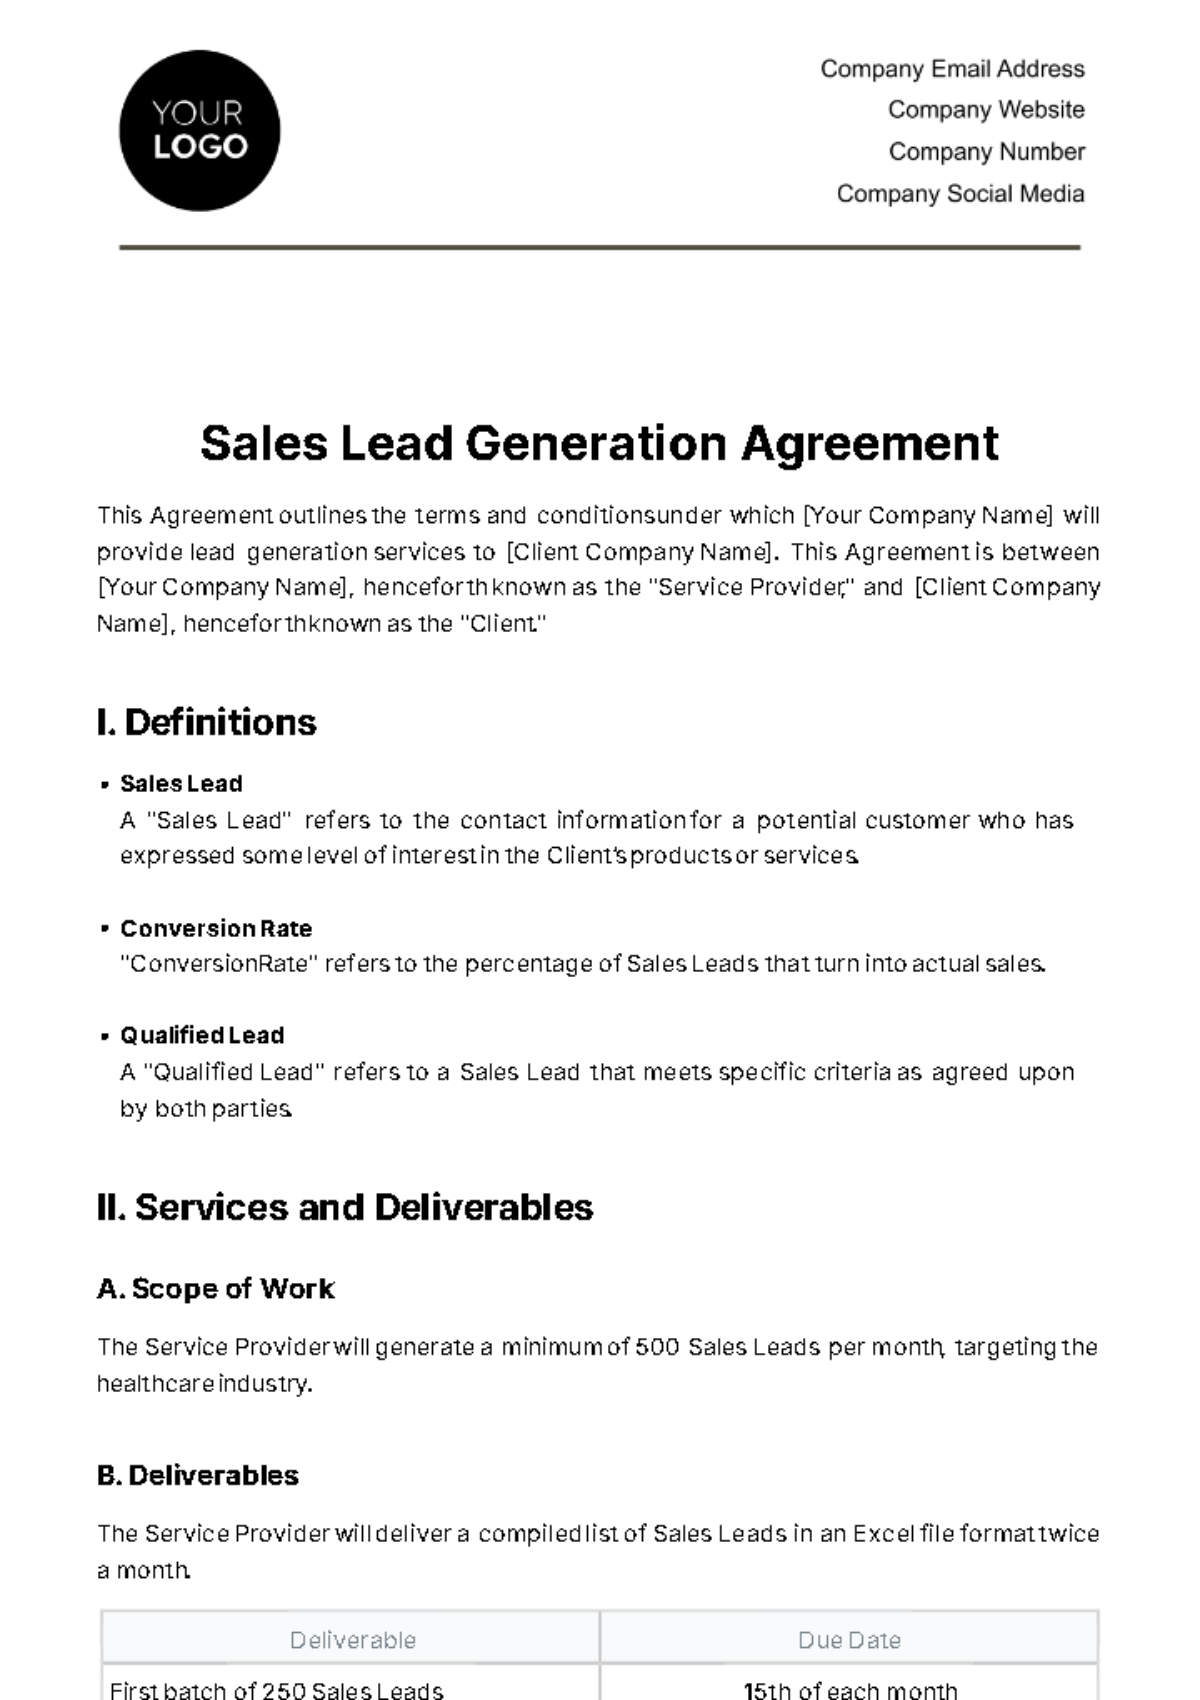 Free Sales Lead Generation Agreement Template